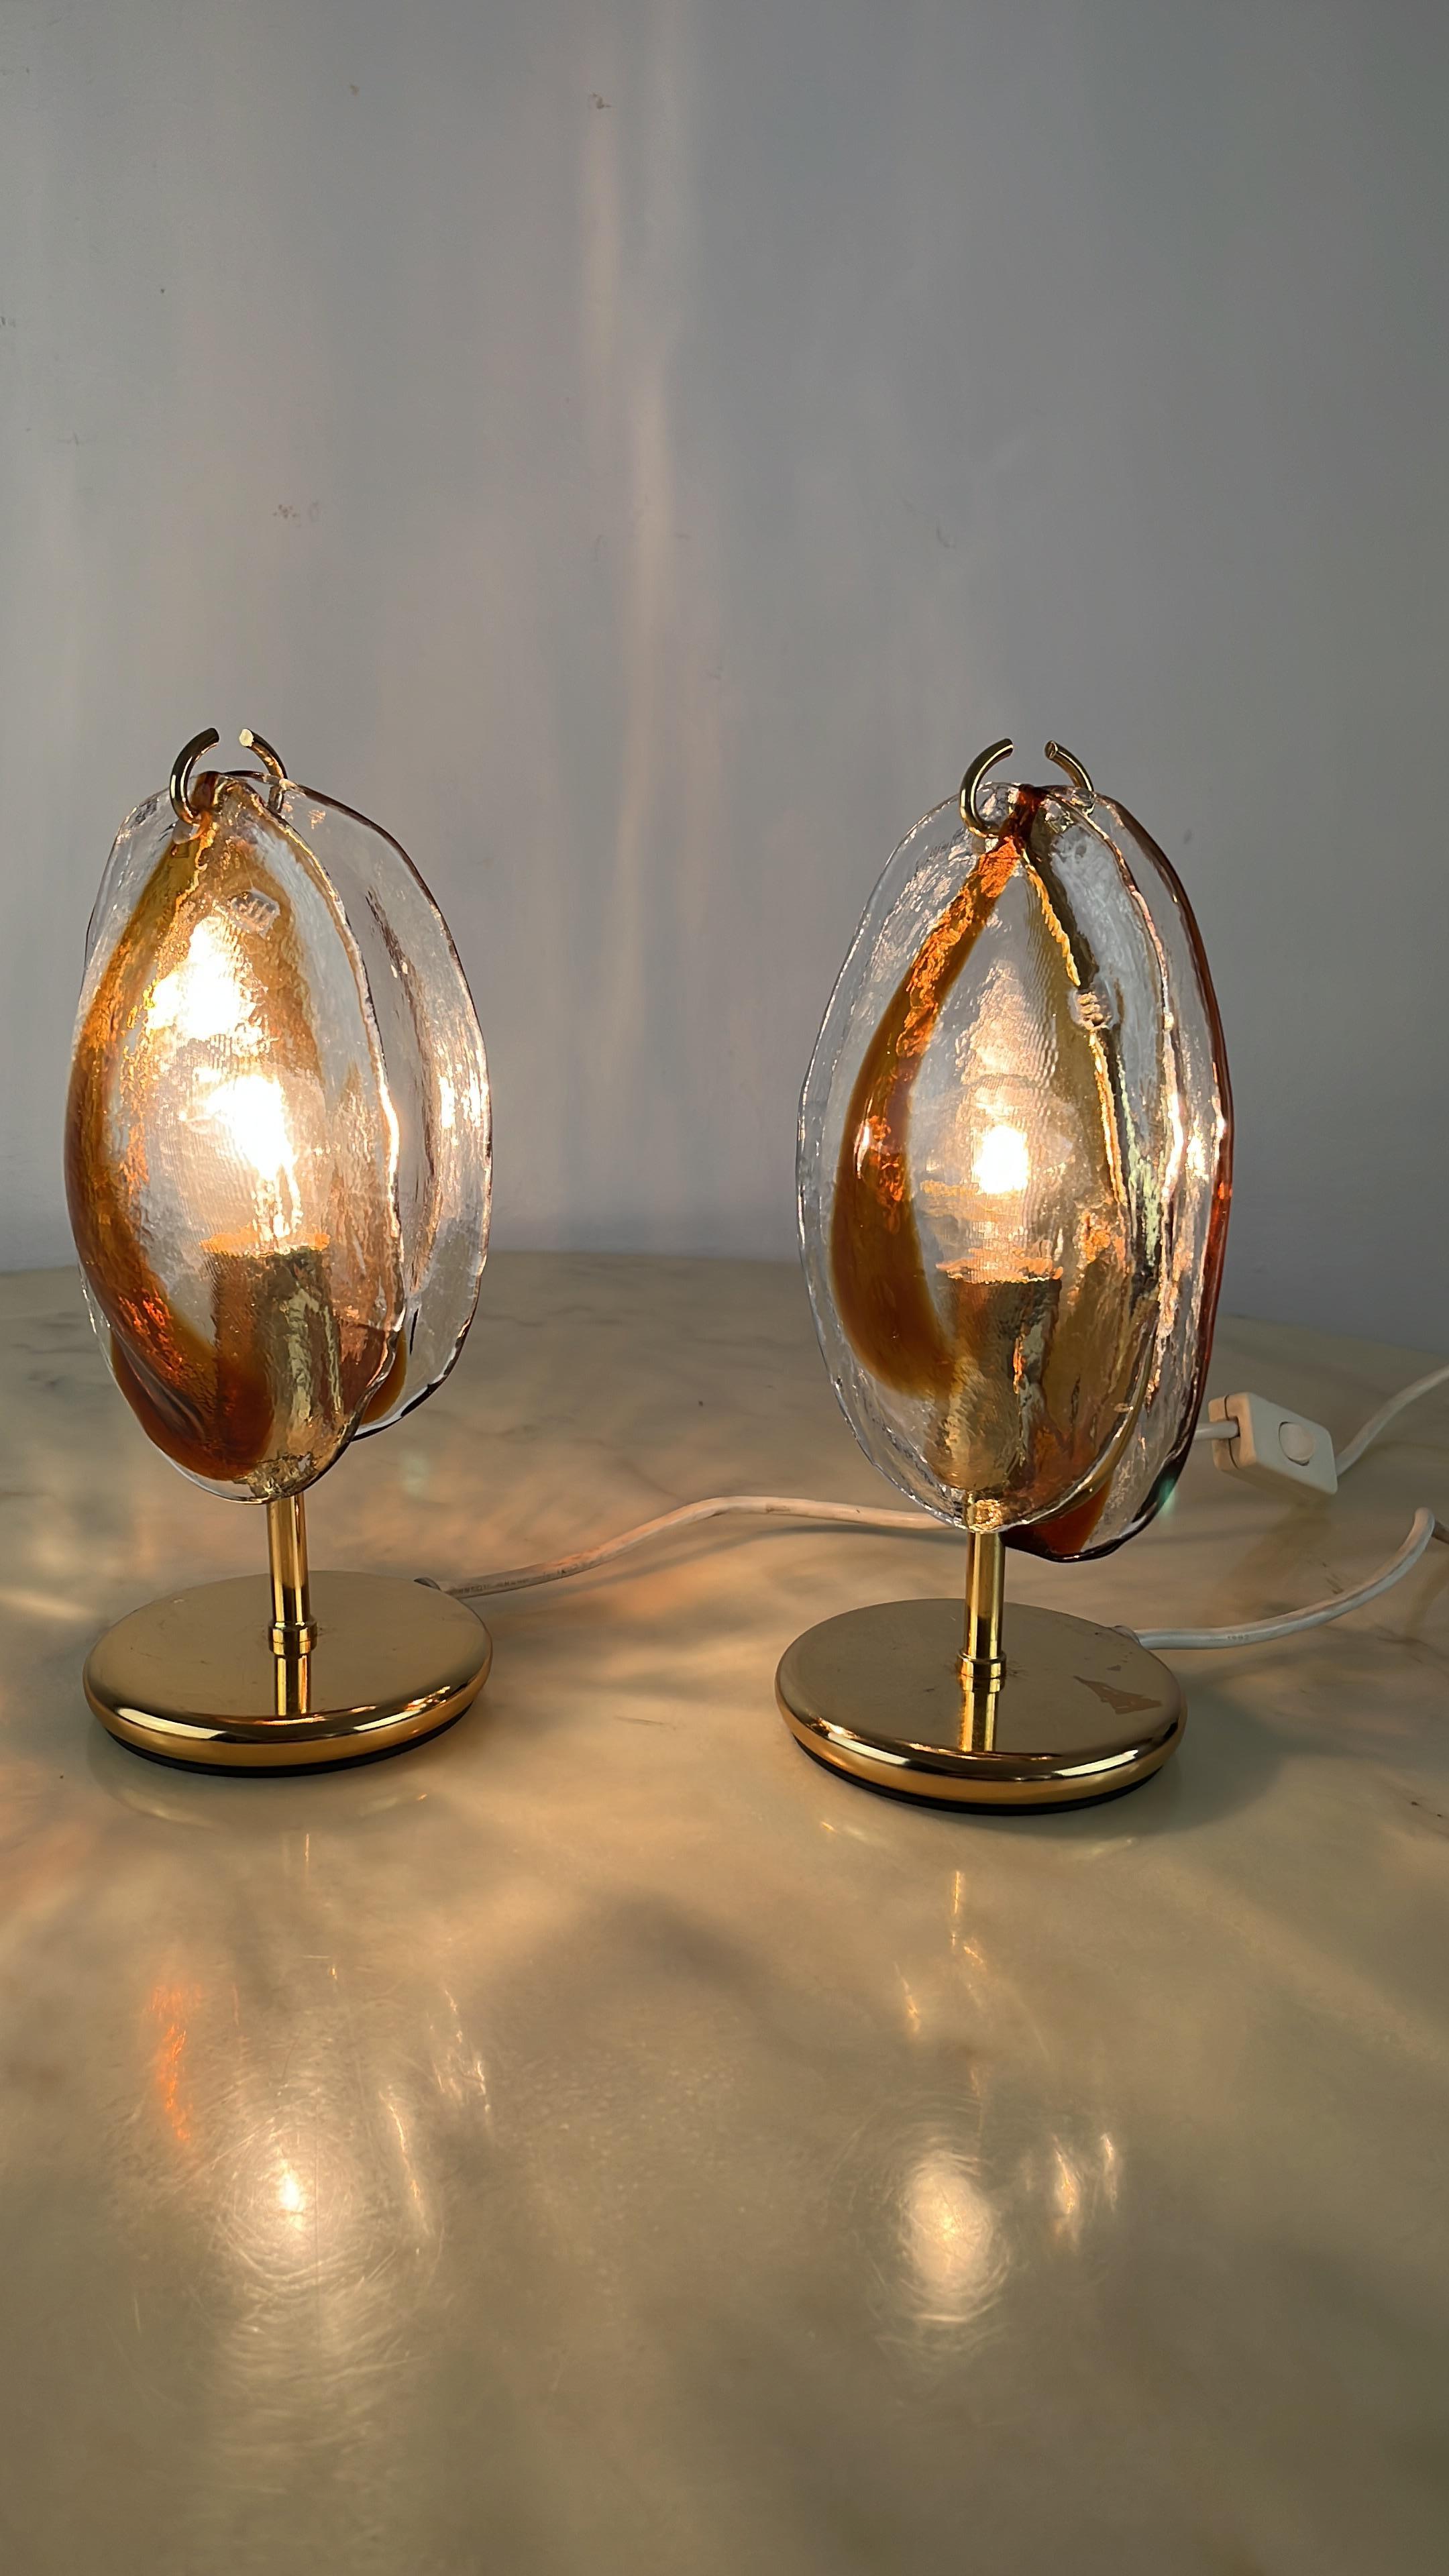 Pair of Murano glass bedside lamps, Italy, 1980s
Attributed to Mazzega, they have a structure in gilded metal. Intact and functioning.Small signs of time and use.